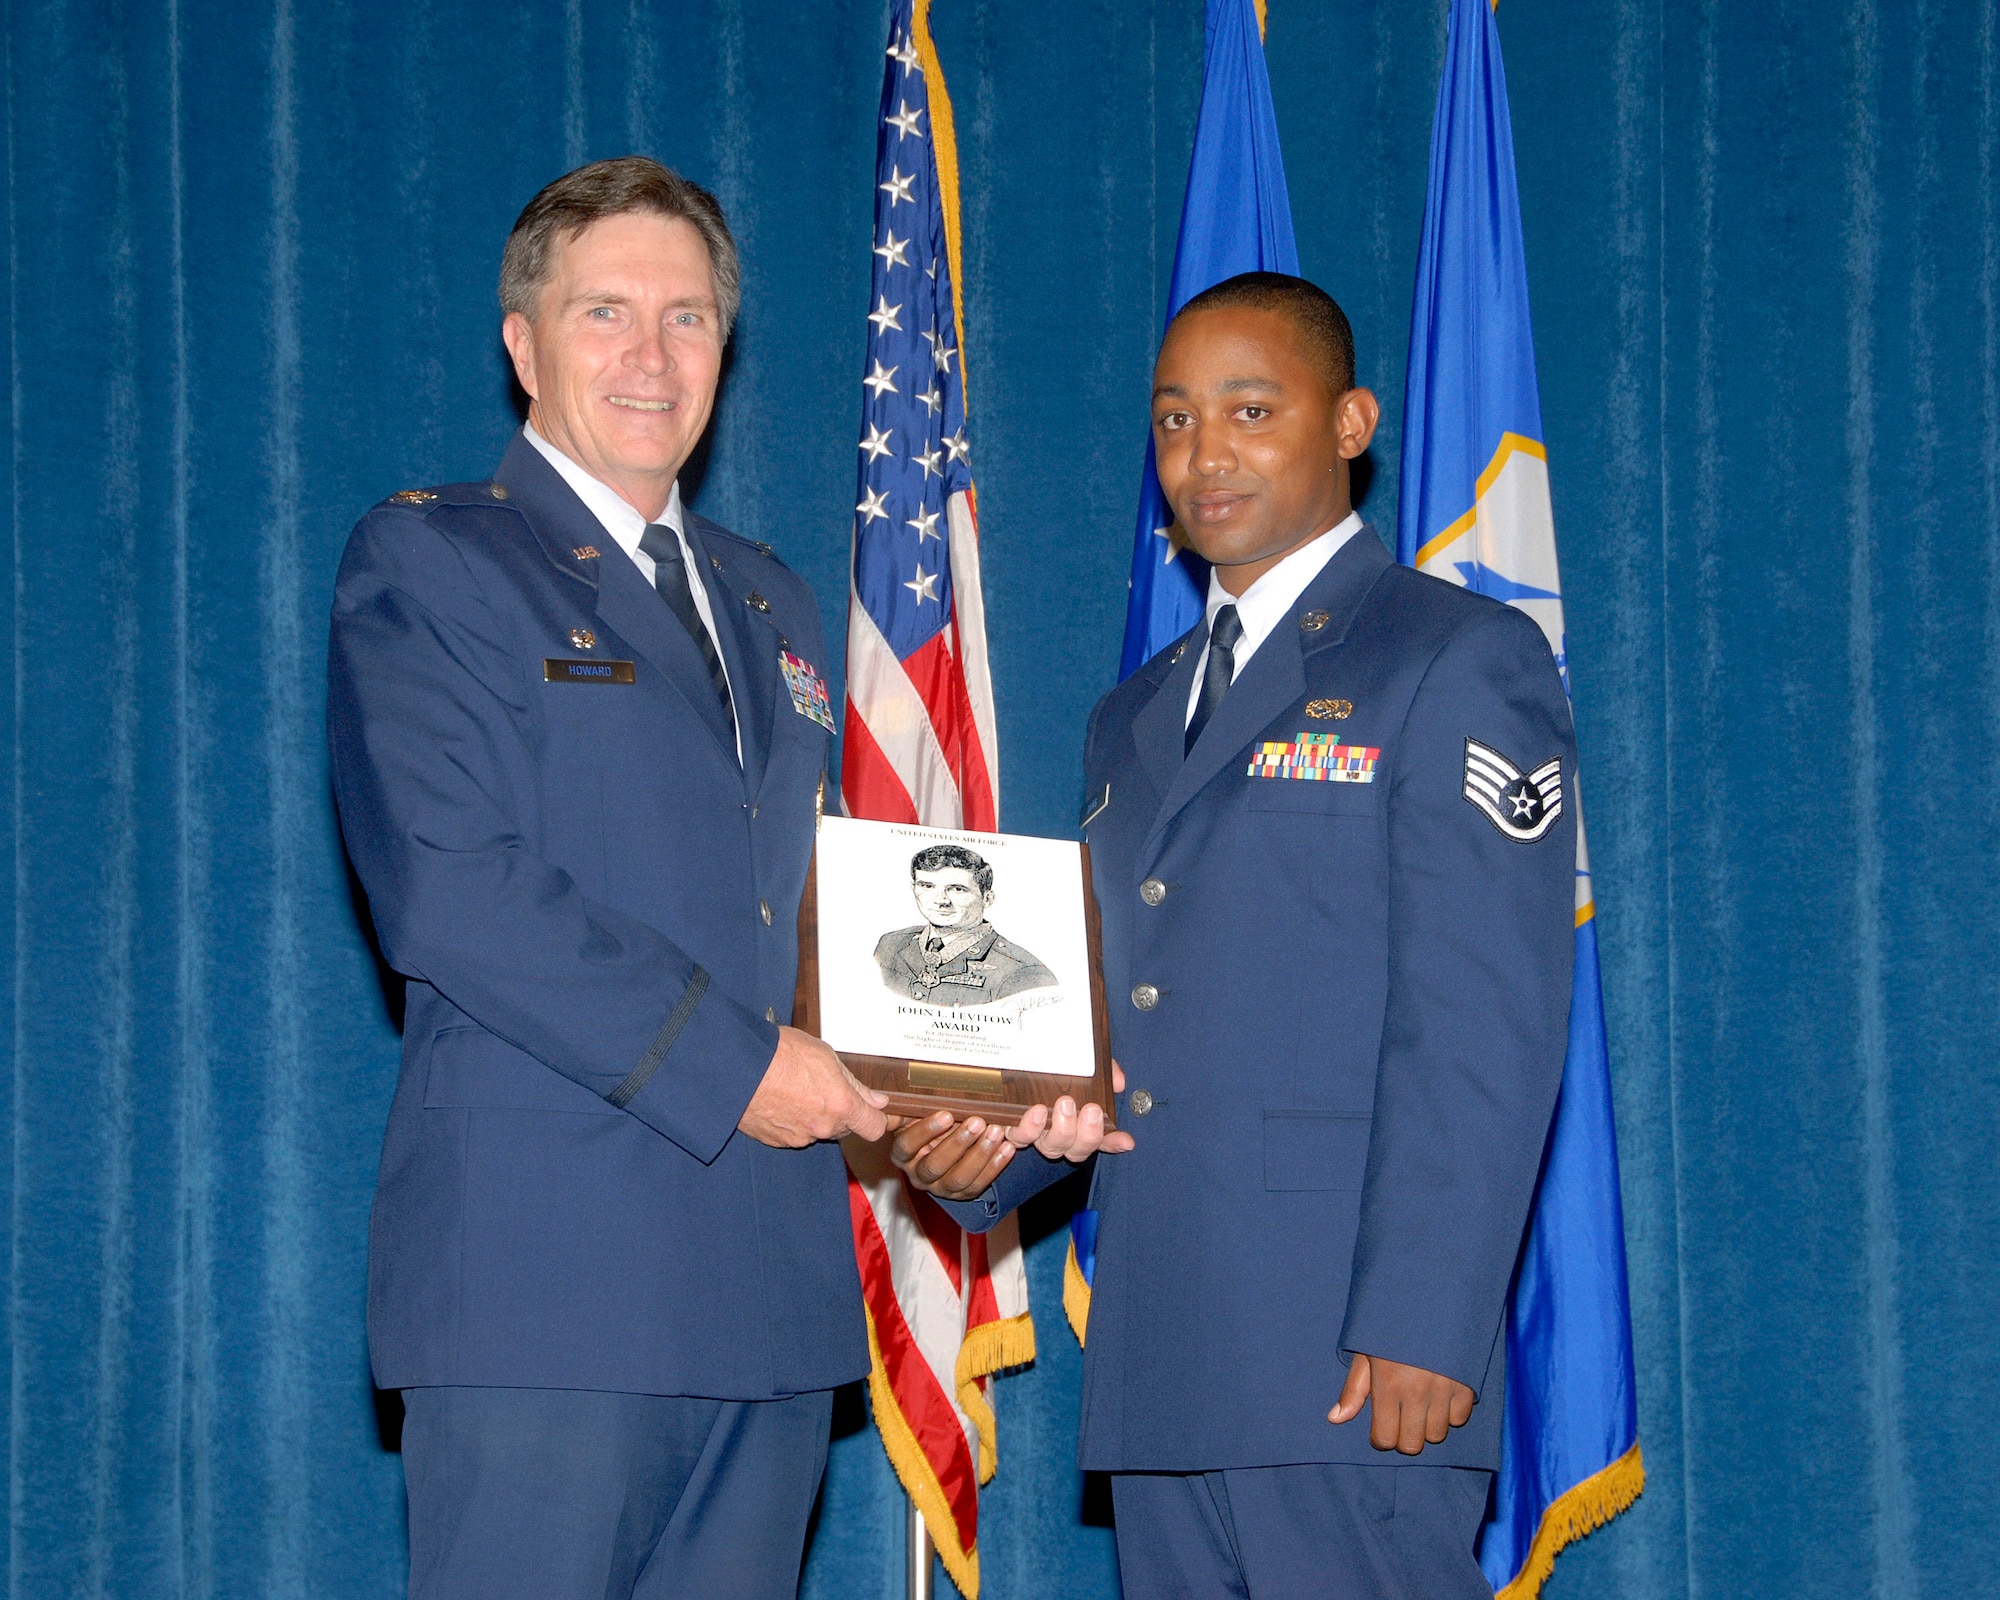 McGHEE TYSON AIR NATIONAL GUARD BASE, Tenn. - Staff Sgt. Telshaun M. Davis,
an avionics systems journeyman, from the 172nd Airlift Wing in Jackson,
Miss., receives the John L. Levitow Award from Col. Richard B. Howard,
commander of the I.G. Brown Air National Guard Training and Education Center
during the graduation ceremony of the Paul H. Lankford Enlisted Professional
Military Education Center's Airman Leadership School Class 09-4, July 30,
2009. (U.S. Air Force photo by Master Sgt. Kurt Skoglund)(Released)